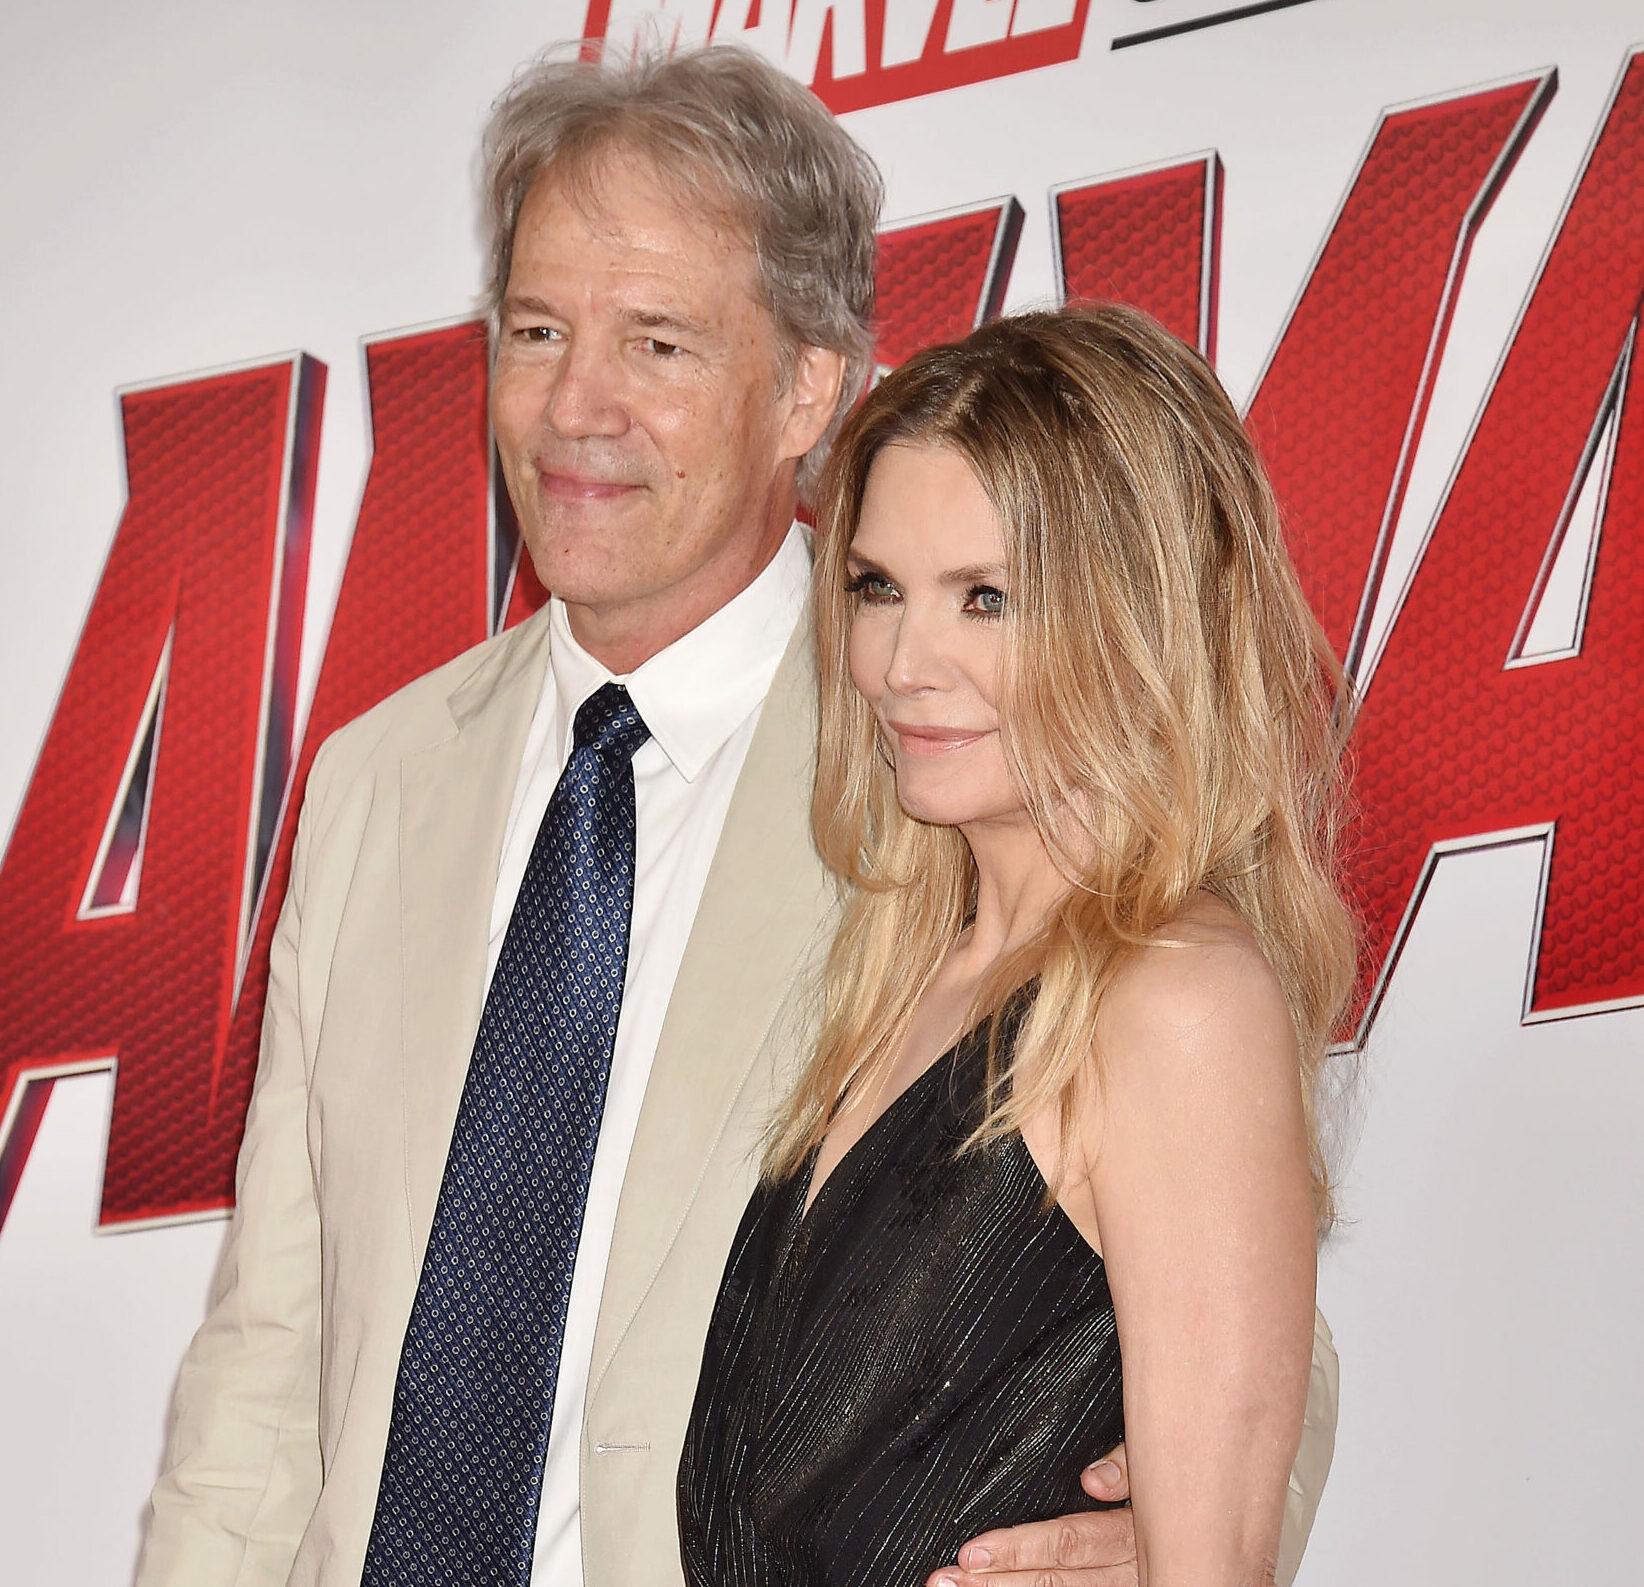 David E. Kelley and Michelle Pfeiffer at the Premiere Of Disney And Marvel's 'Ant-Man And The Wasp'